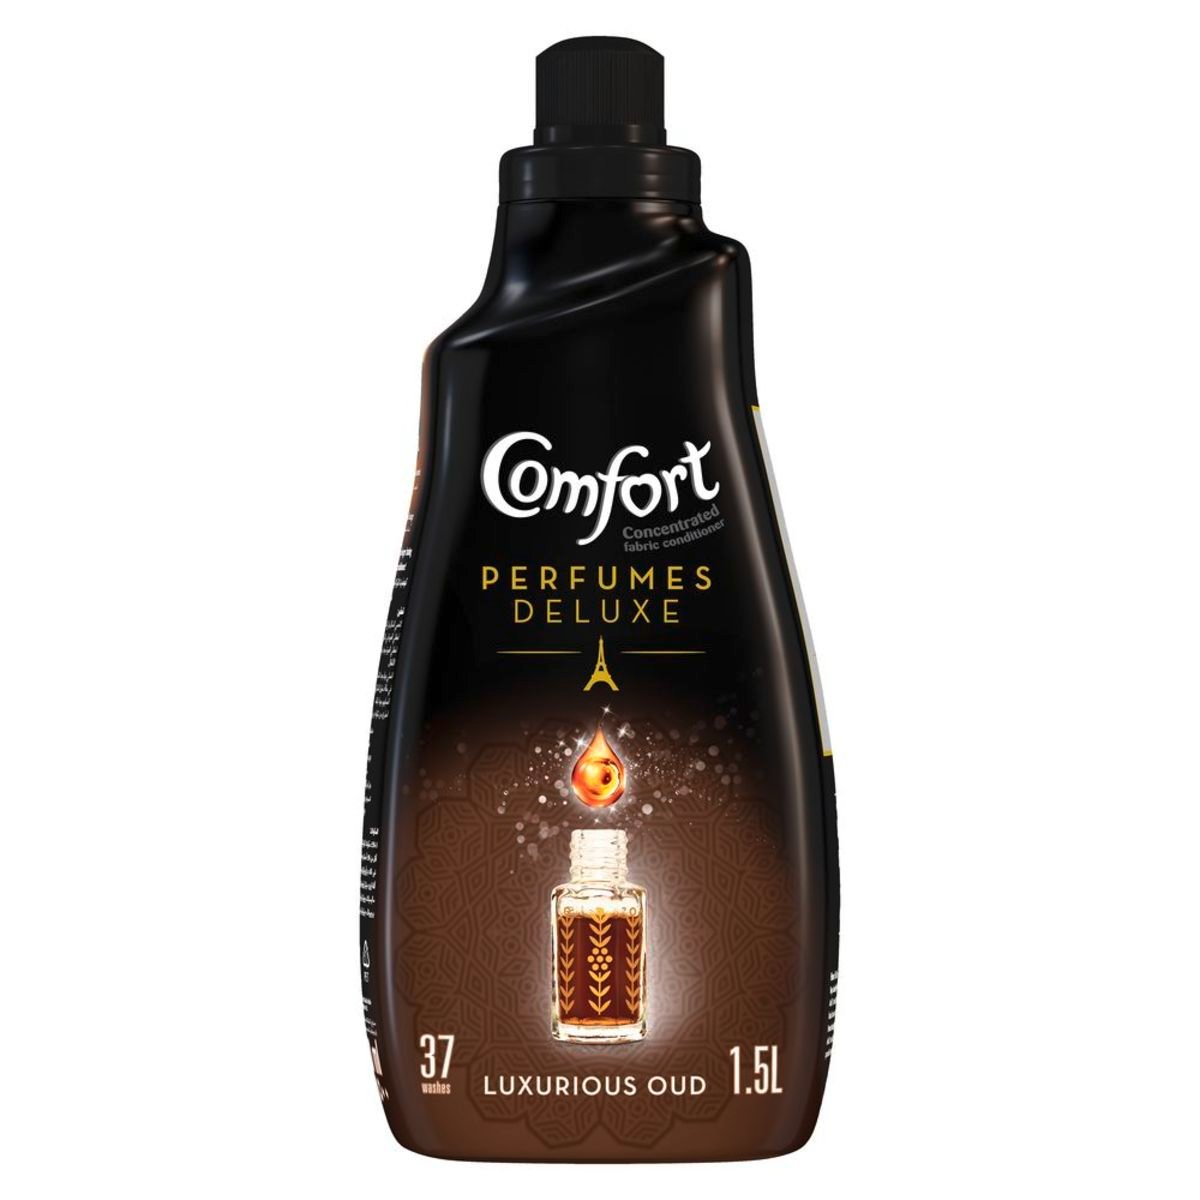 Comfort Perfumes Deluxe Concentrated Fabric Softener Luxurious Oud 1.5Litre